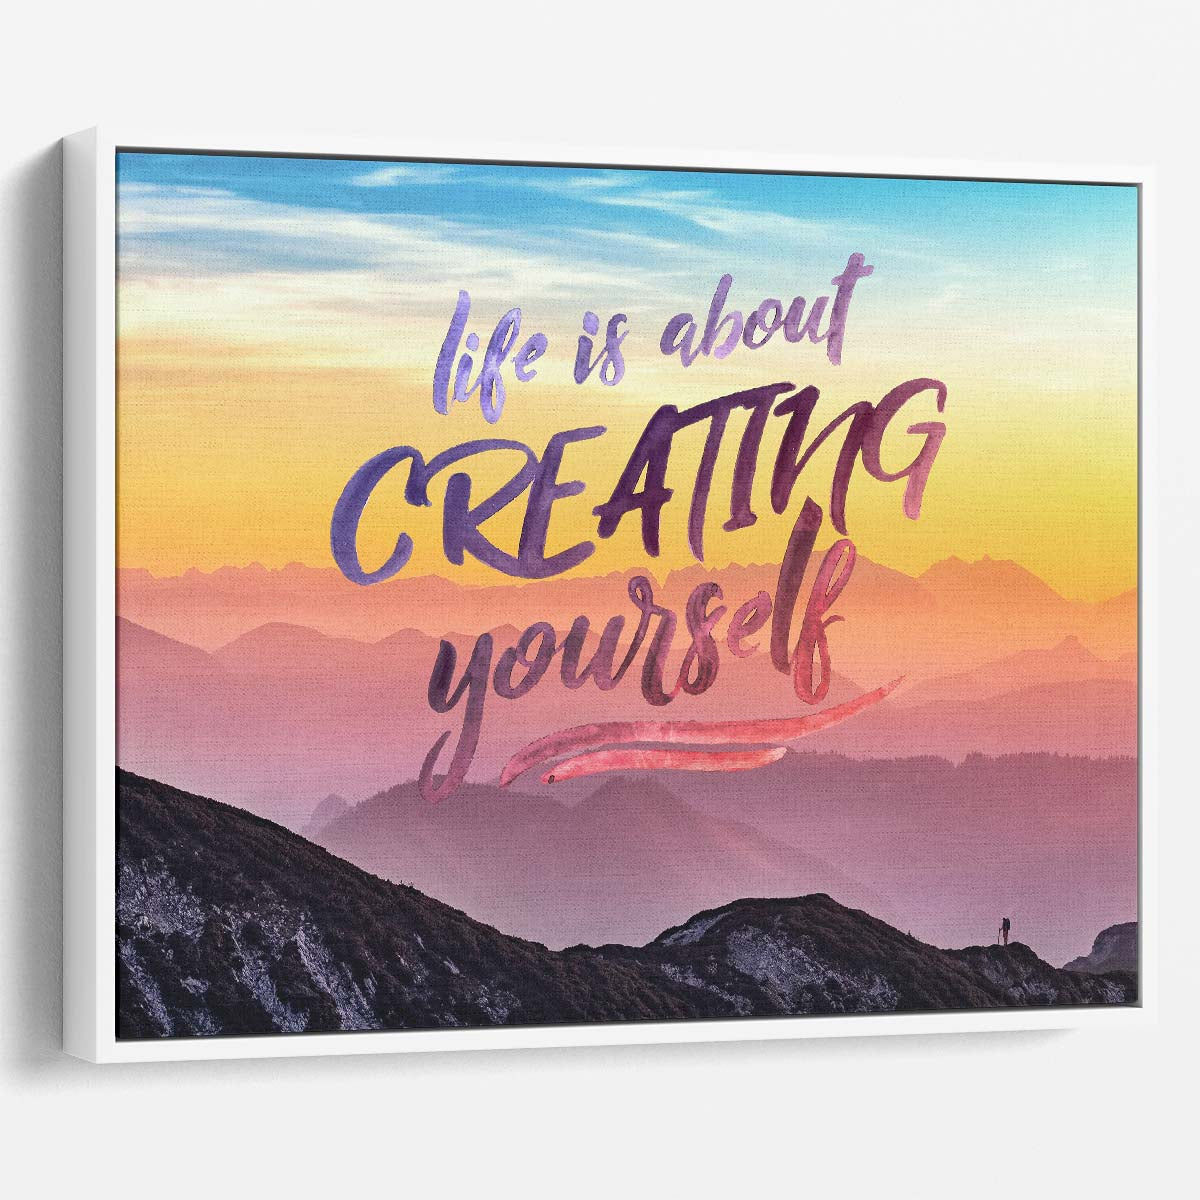 Life Is About Creating Yourself Wall Art by Luxuriance Designs. Made in USA.